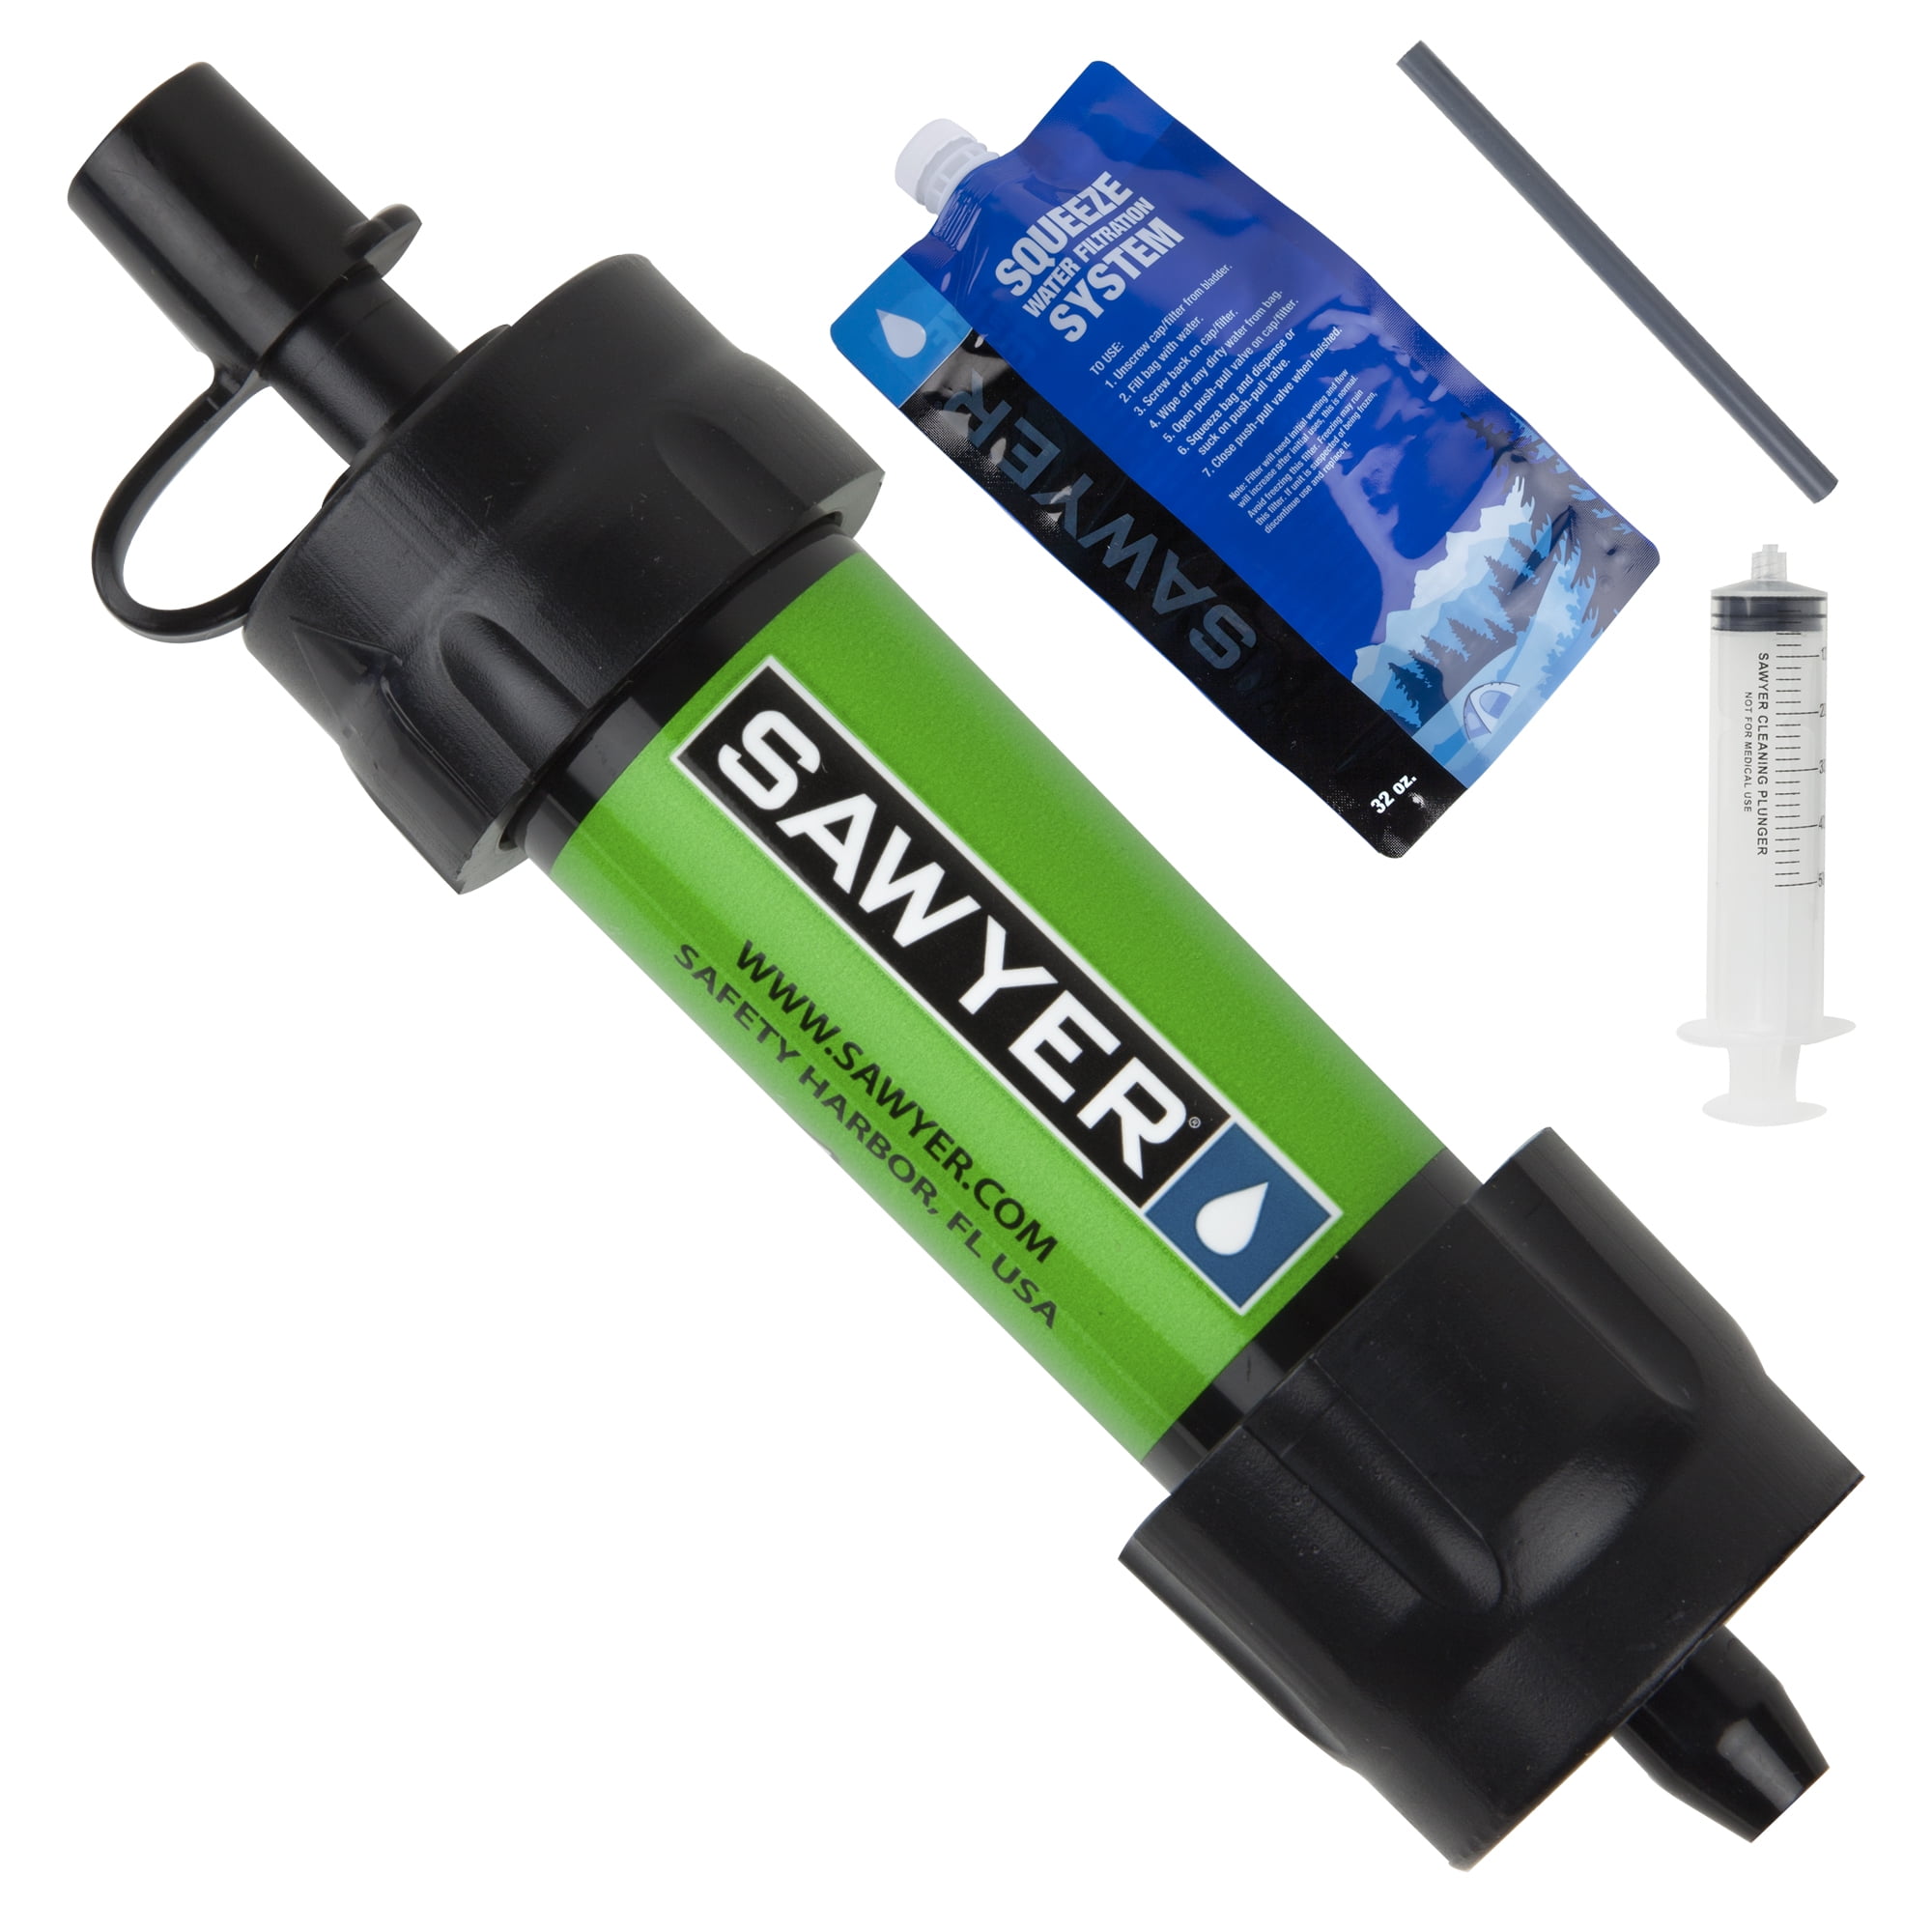 Sawyer Blue x 2 MINI Filter outdoor portable water filter with soft water bag